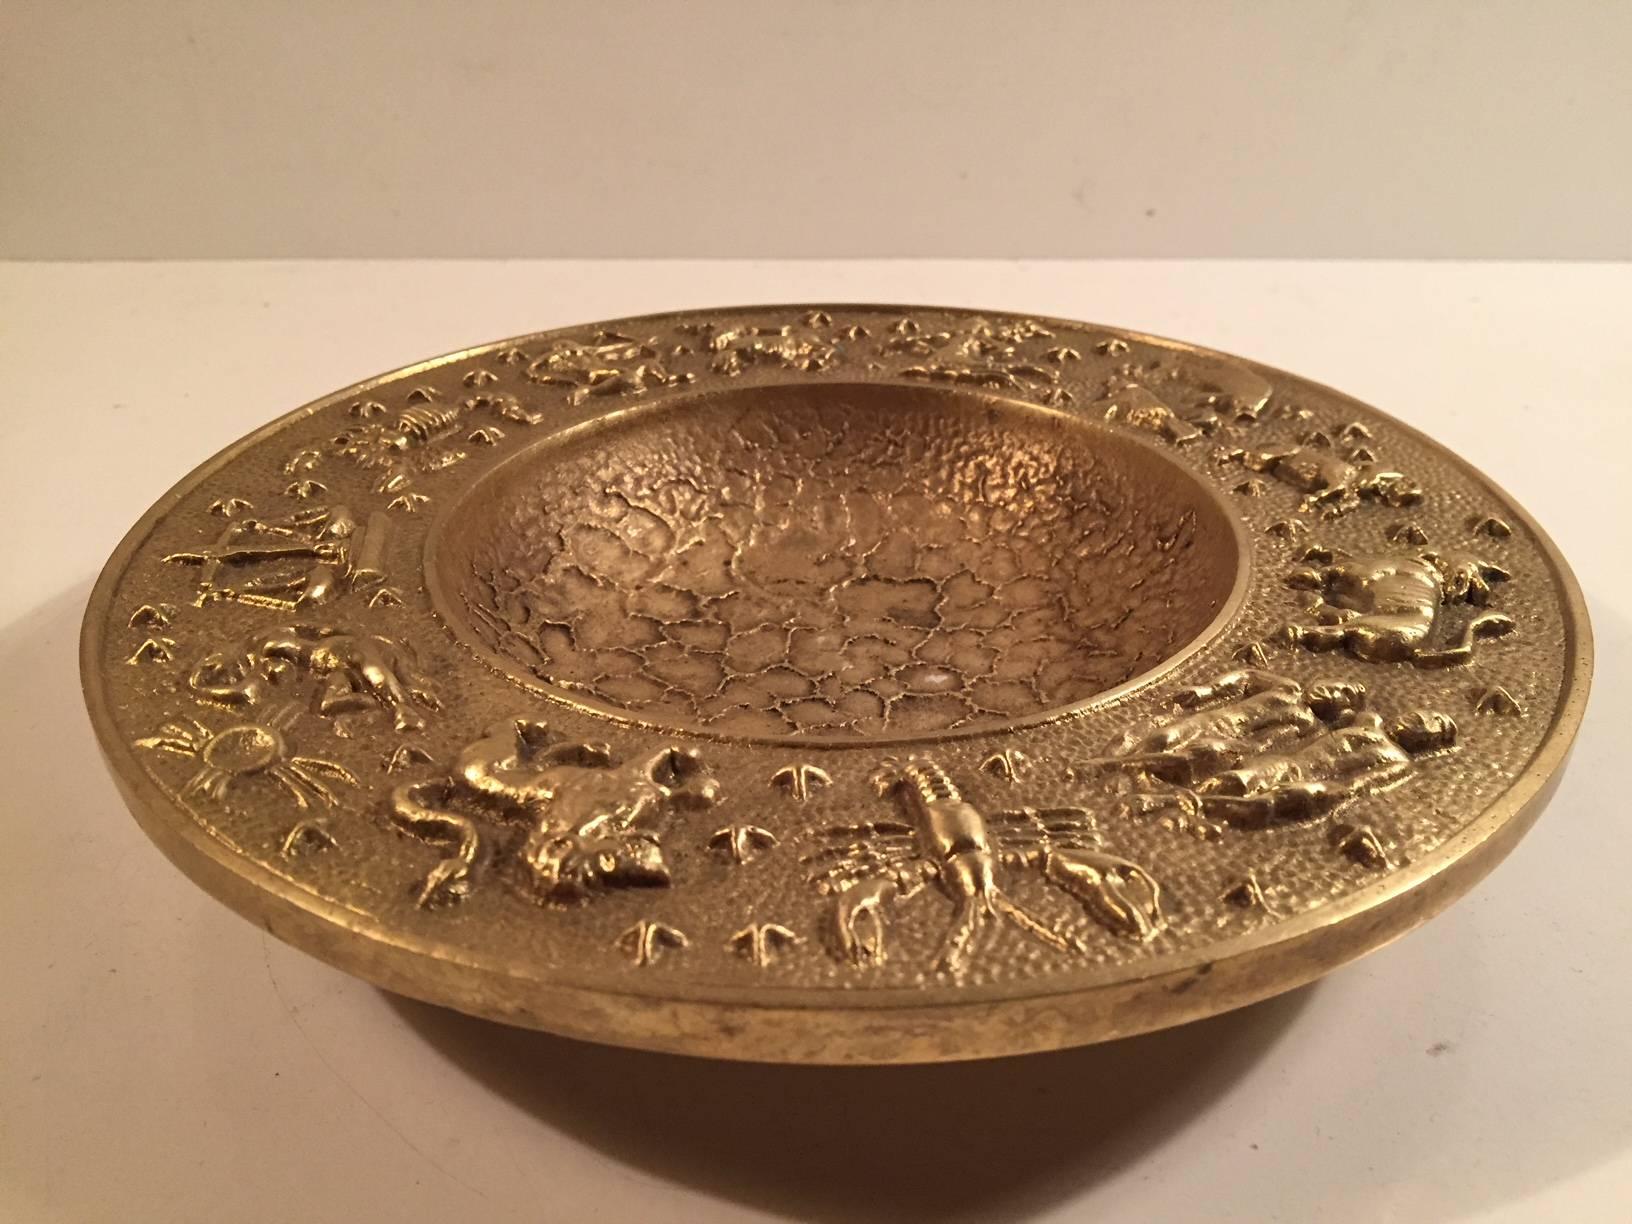 Art Deco Vintage Danish Zodiac Bronze Bowl with Moon Texturing from Nordisk Malm, 1940s